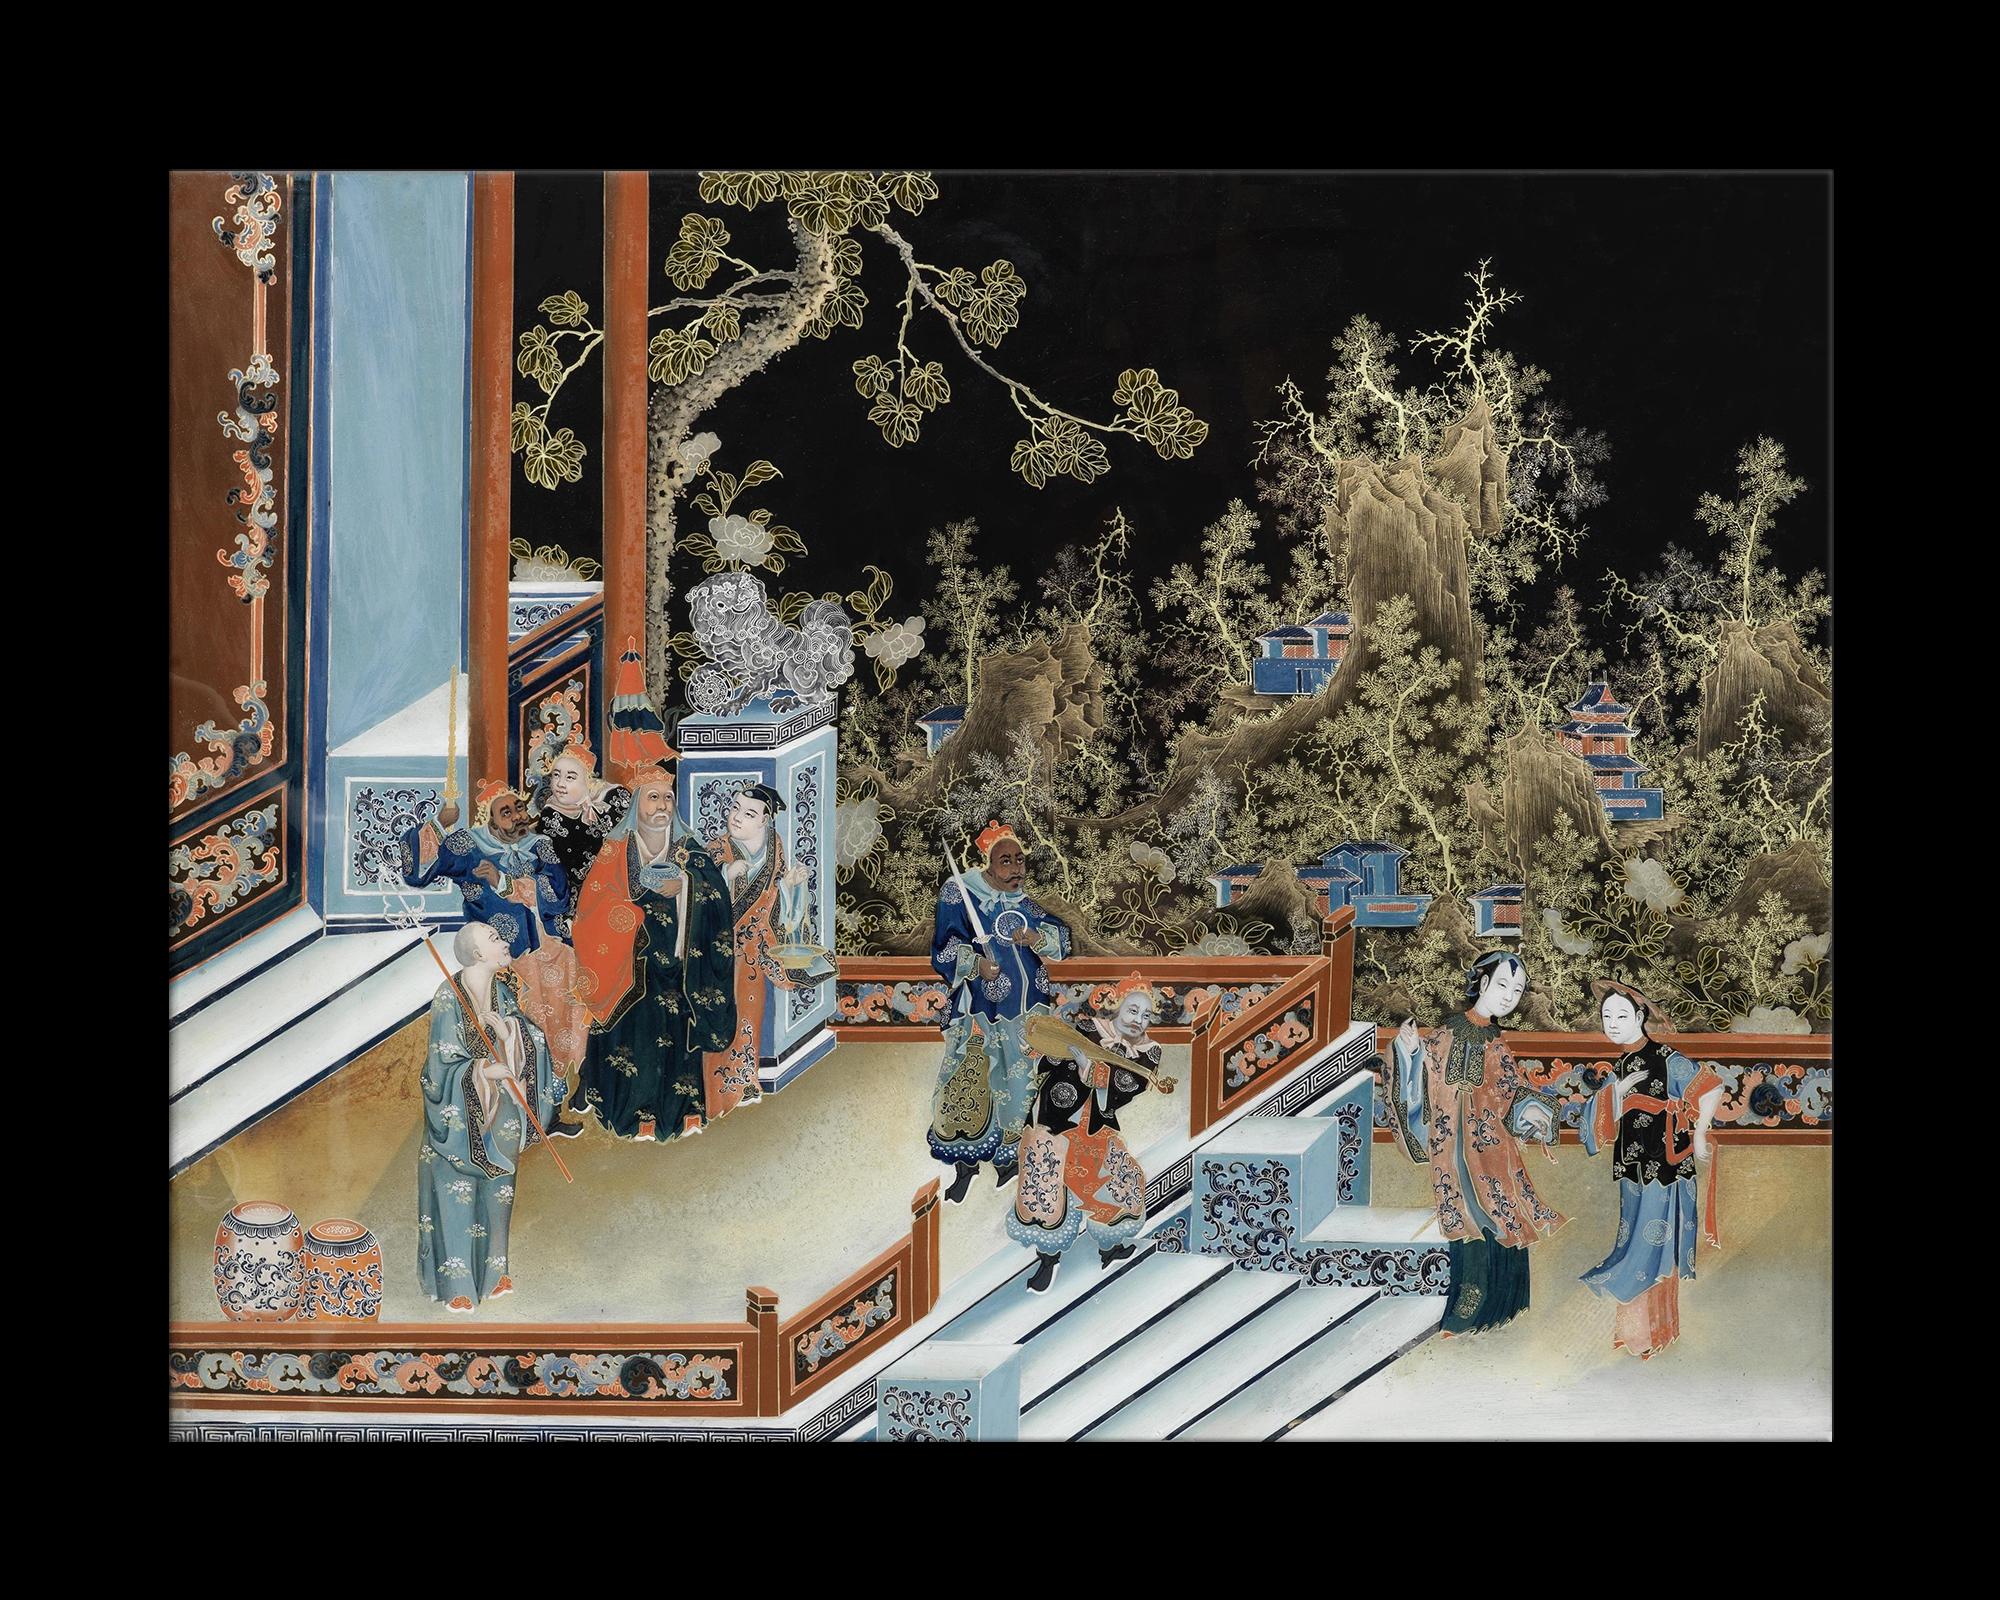 This large, Ming Dynasty Masterpiece is a faithful yet nuanced reproduction of 